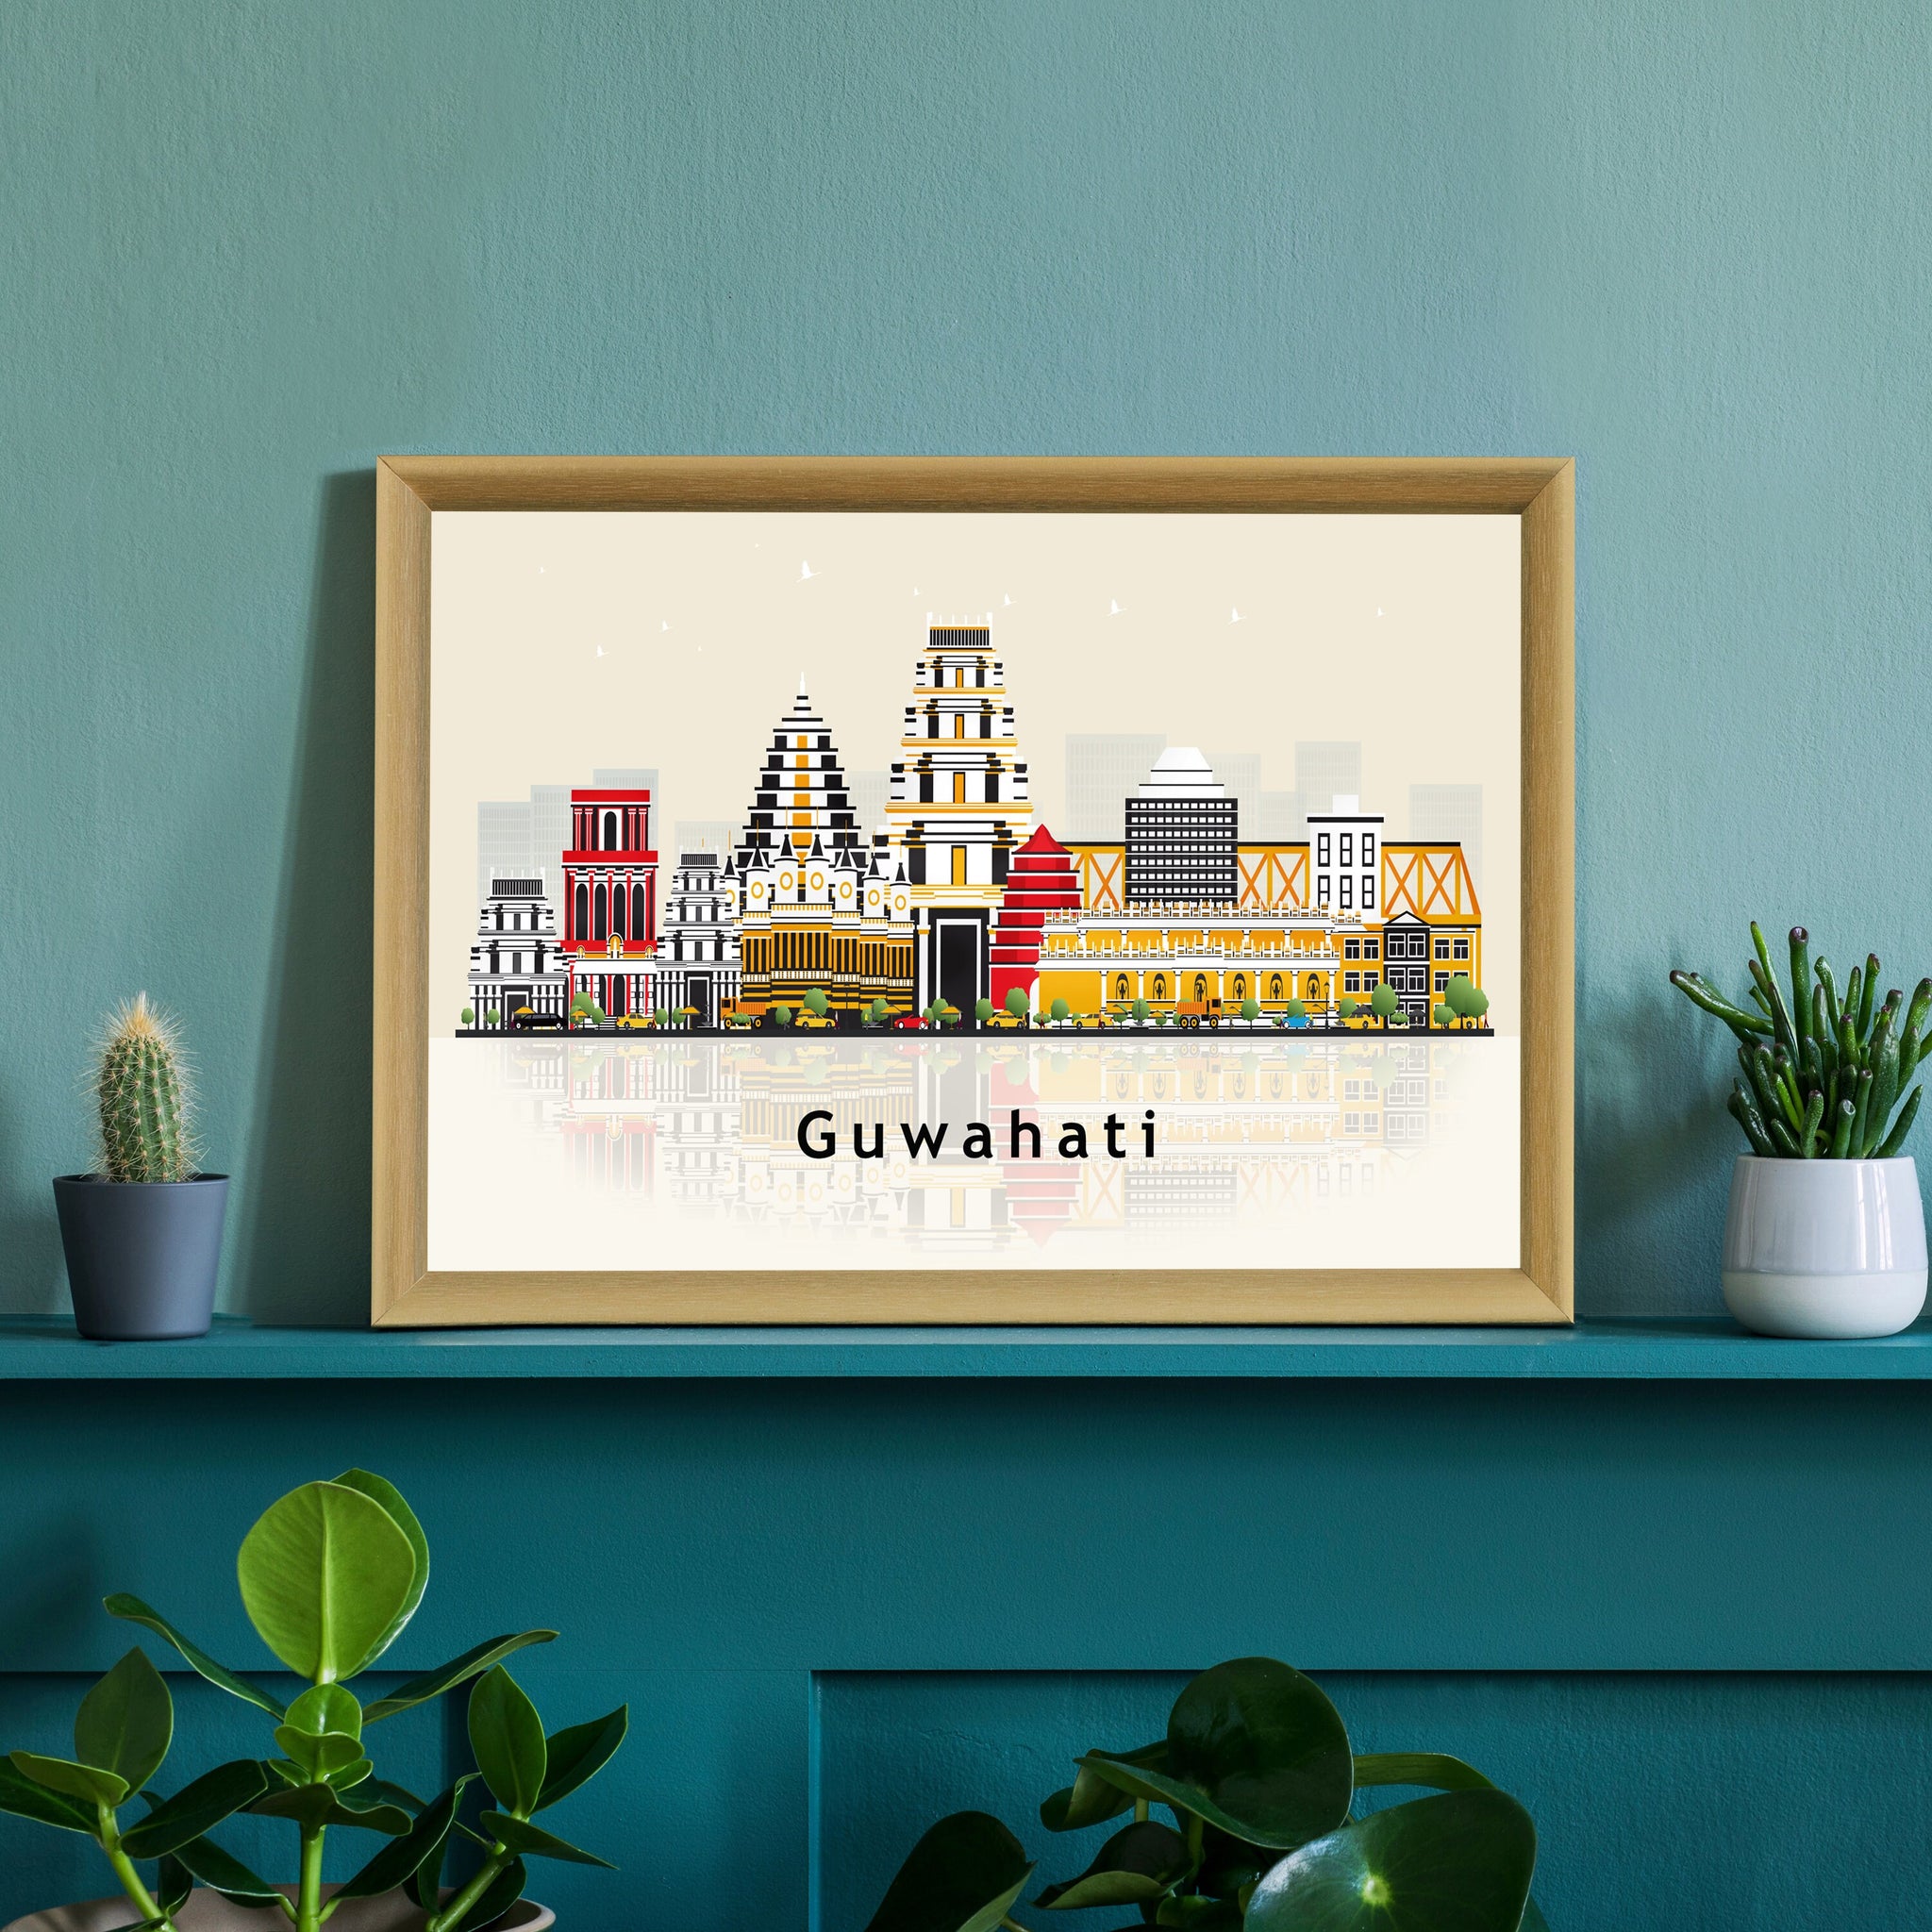 GUWAHATI INDIA Illustration skyline poster, Modern skyline cityscape poster, India city skyline landmark map poster, Home wall decoration